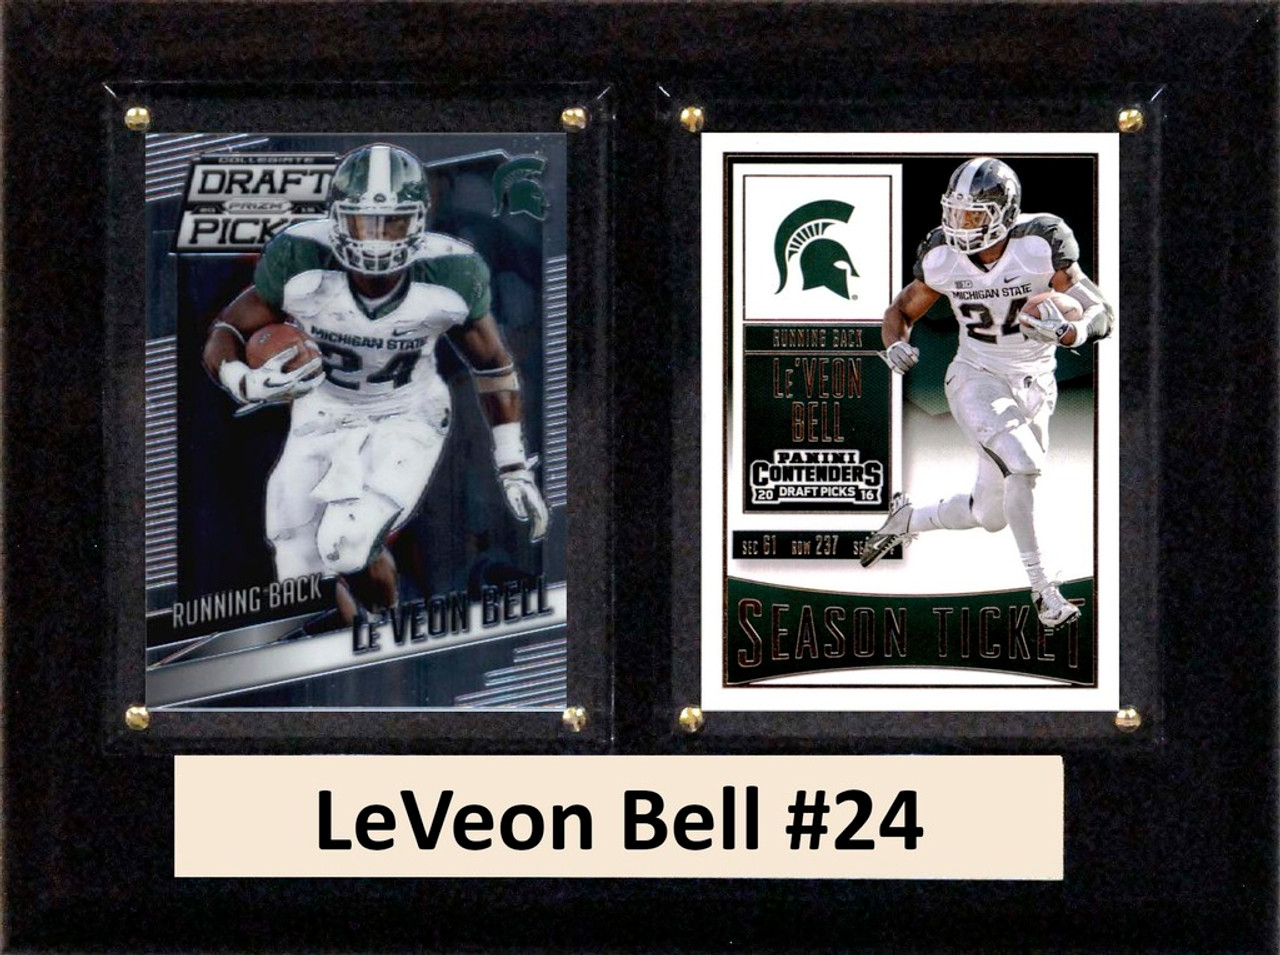 NCAA 6"X8" Le'Veon Bell Michigan State Spartans Two Card Plaque